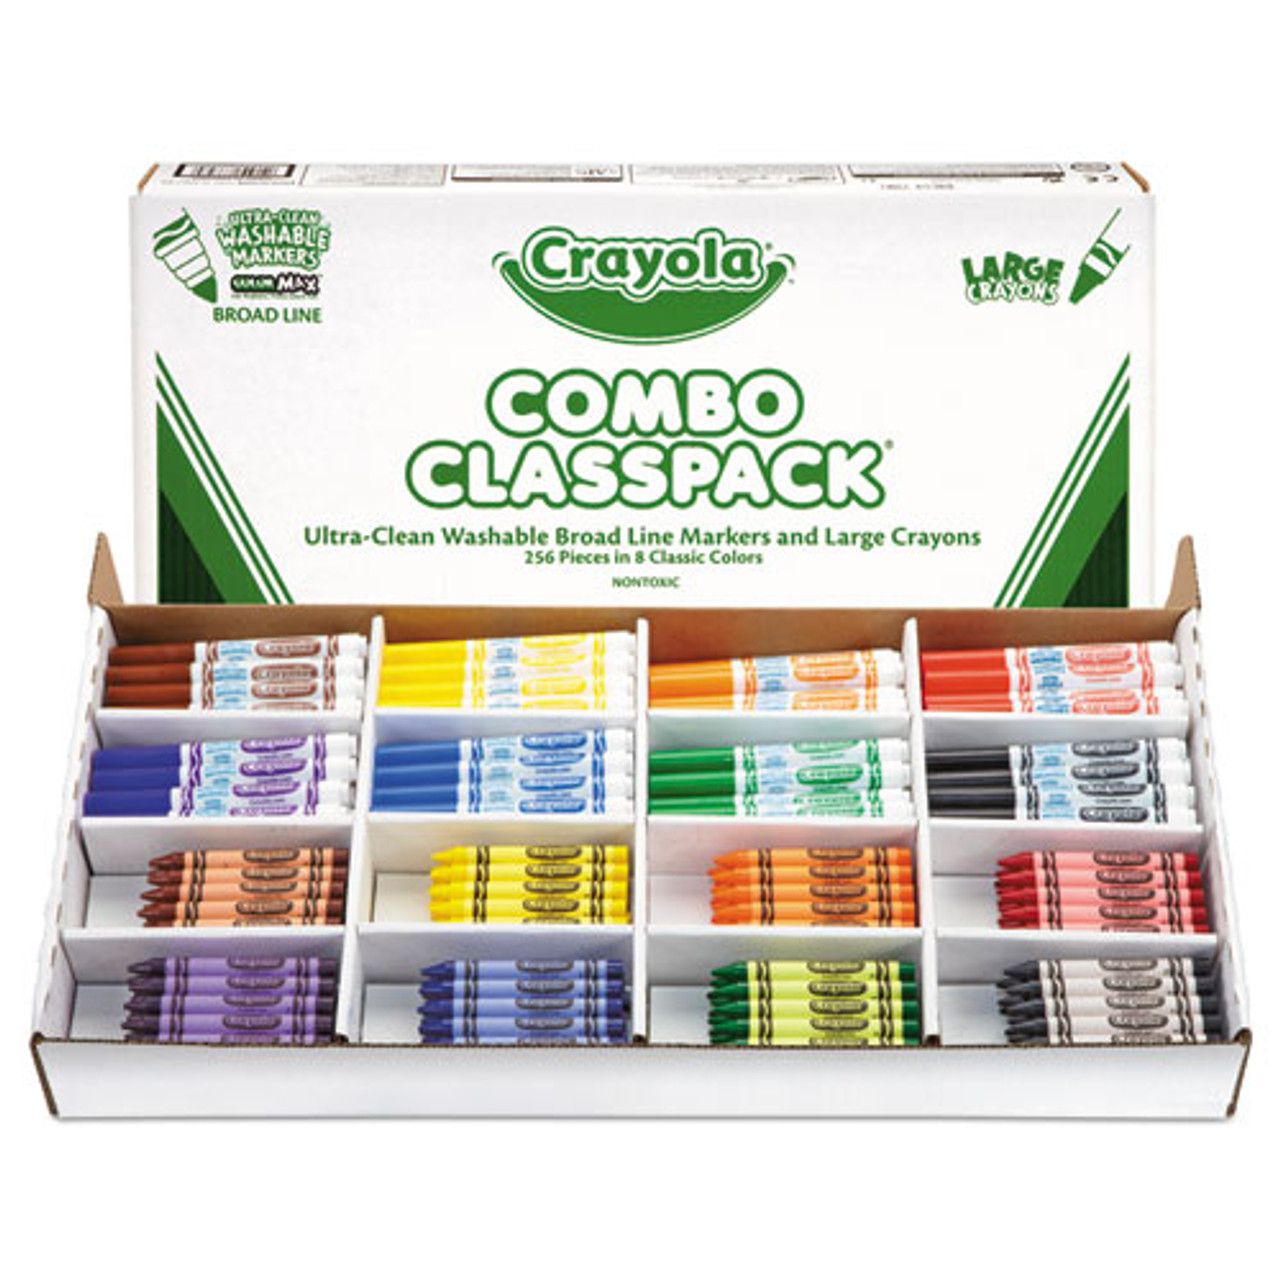 WASHABLE COLORING MARKERS 8 COLORS